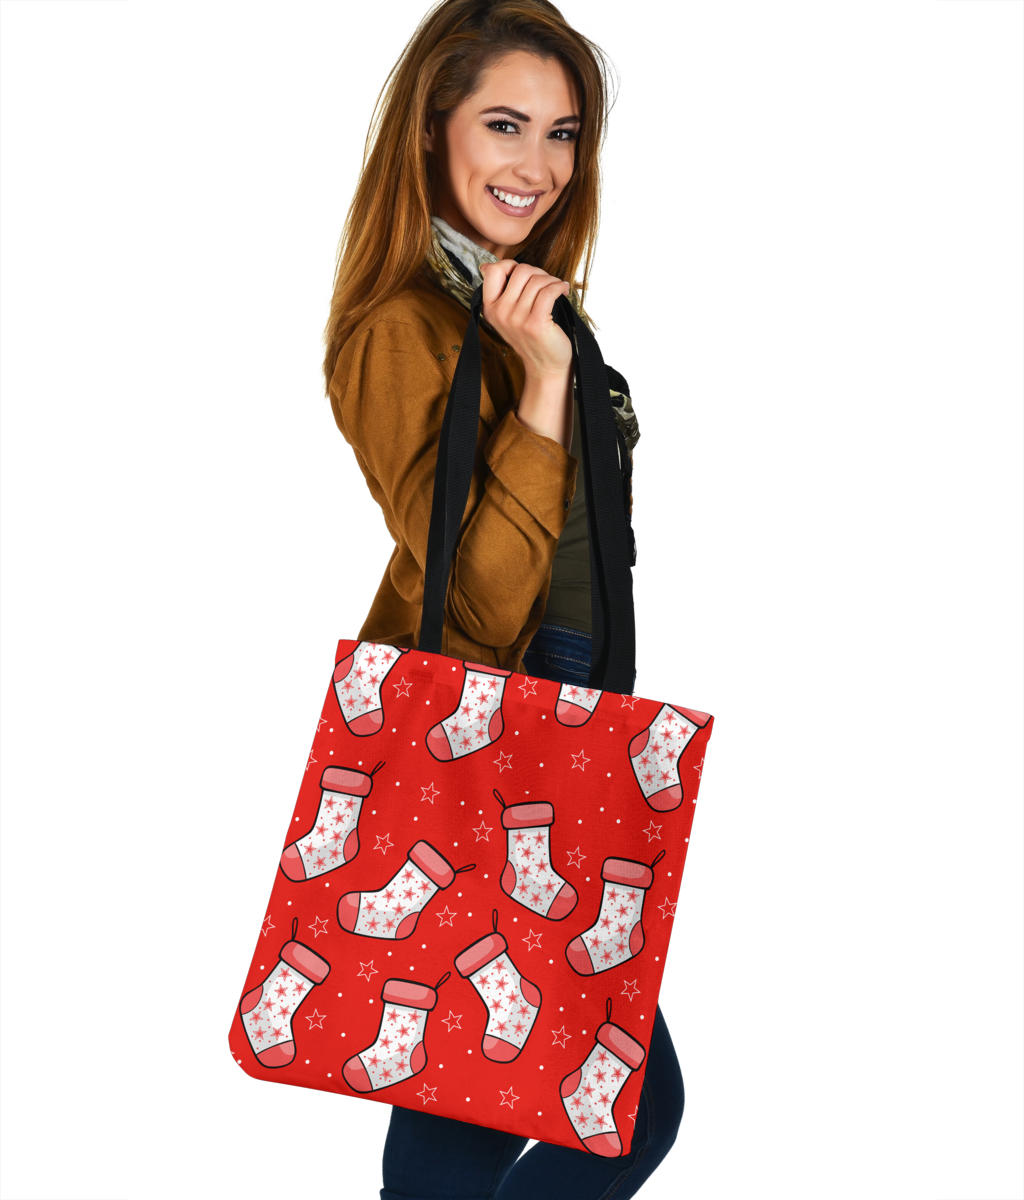 Red Stockings Linen Tote Bag